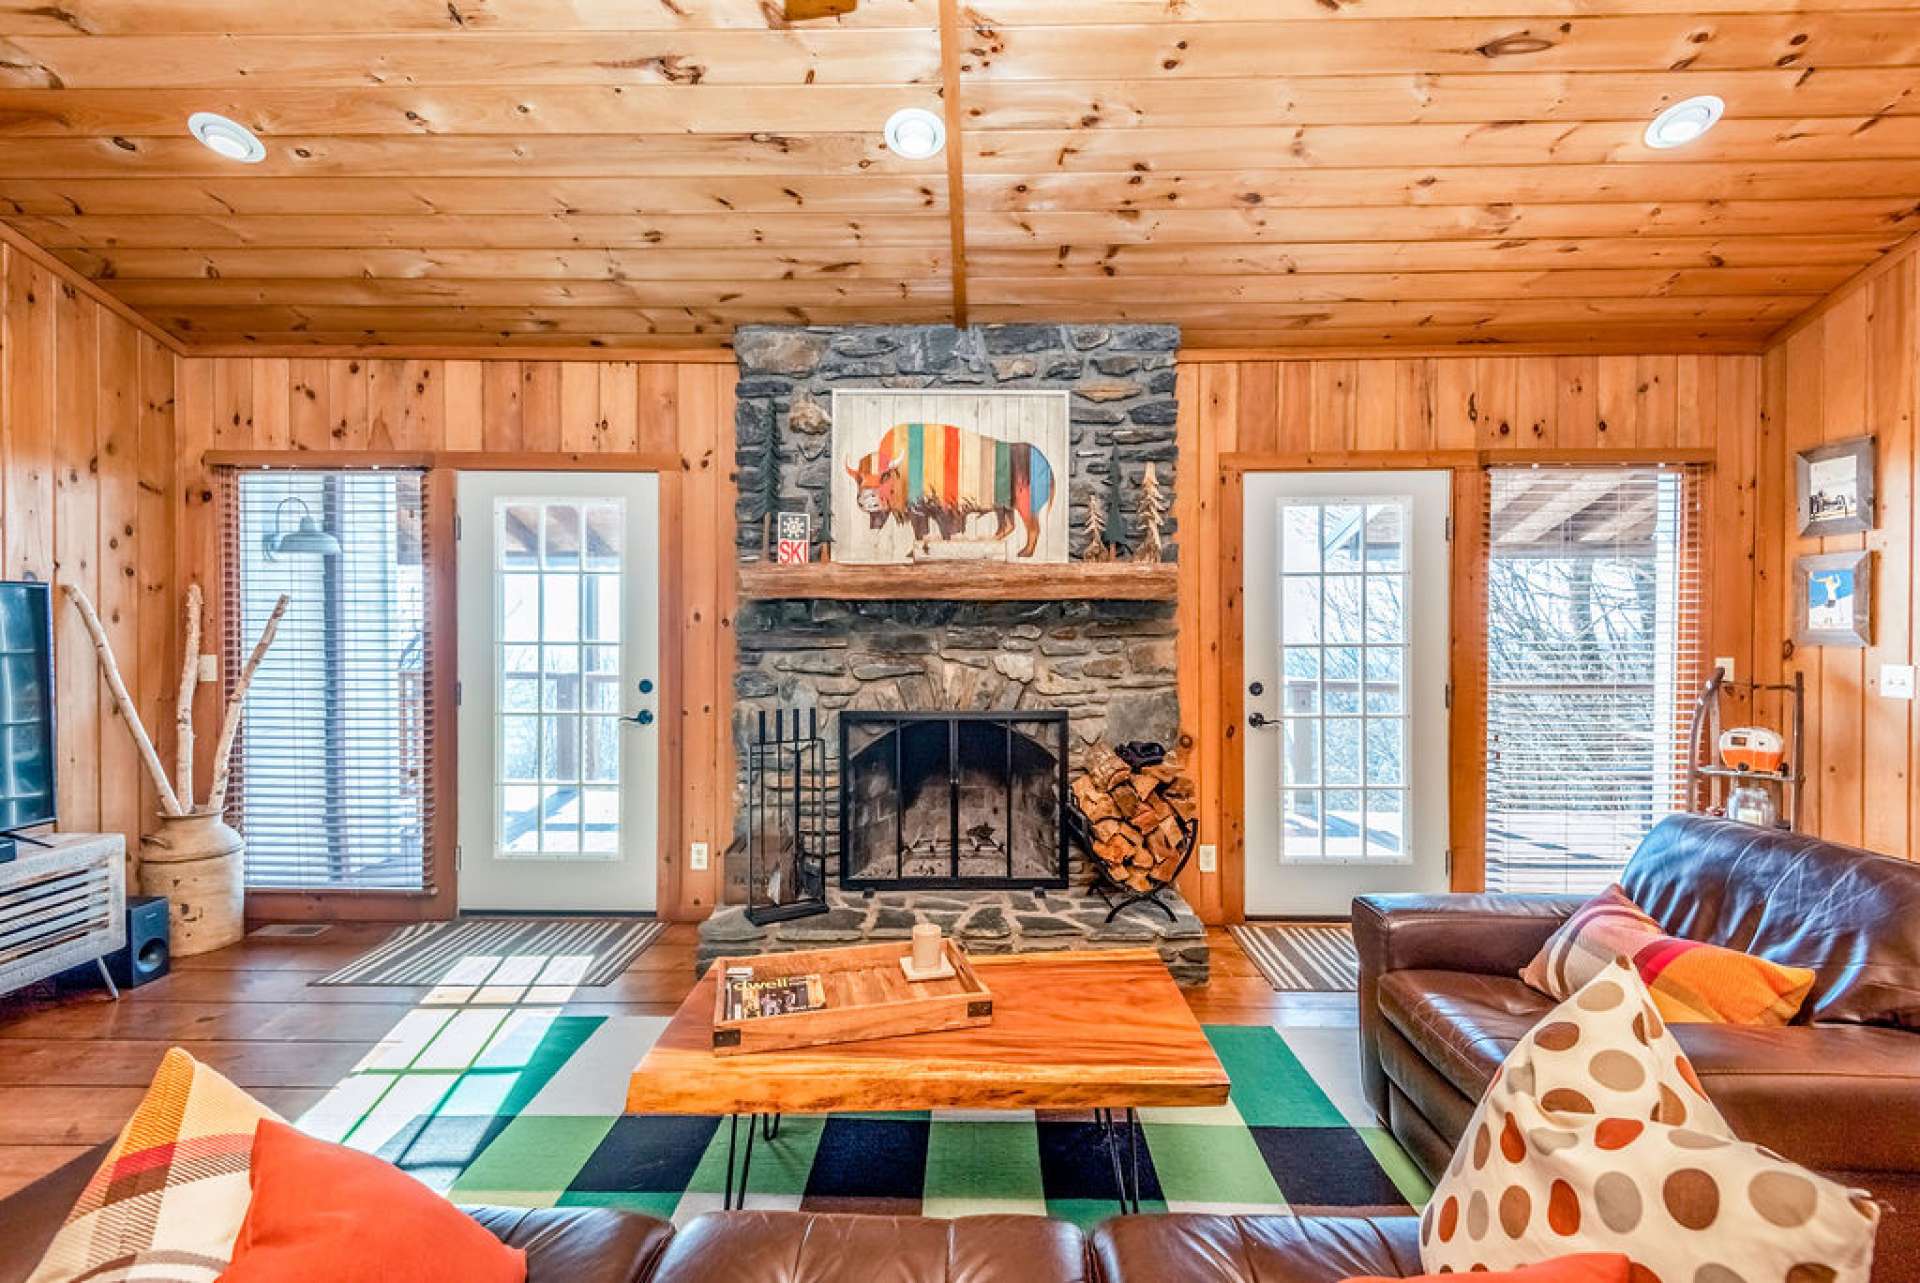 Enter through the front door to find this wood-burning stone fireplace centered between two sets of doors and windows, allowing abundant light and views to the beautiful mountains just steps away. Fireplace was built using native stones that were gathered directly from the community.